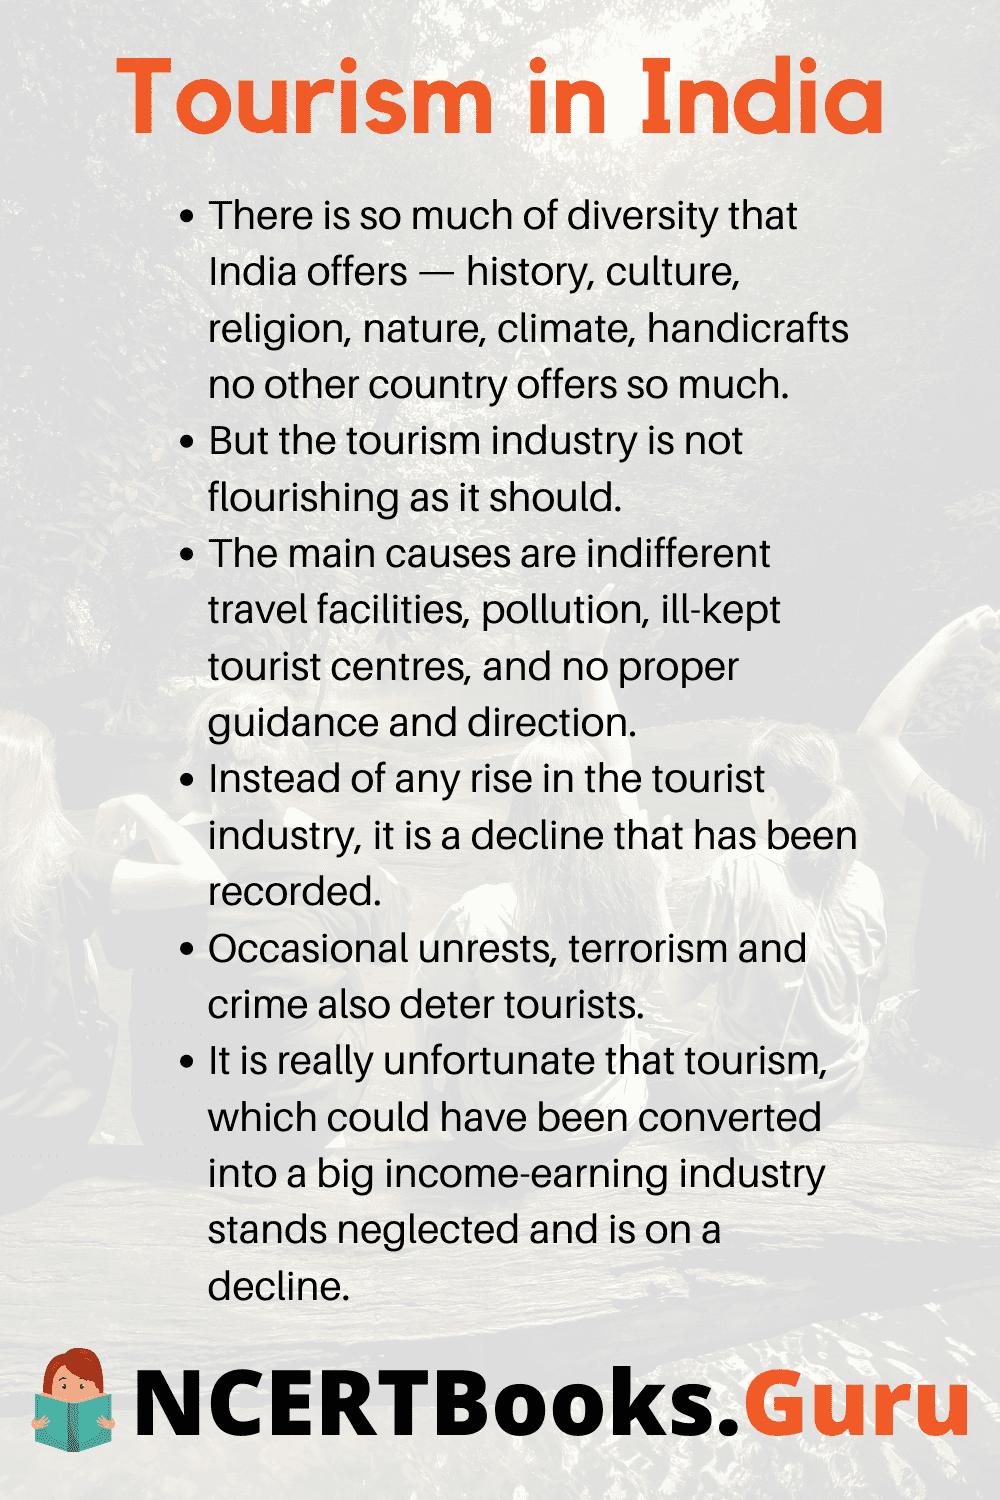 tourism in india essay 150 words